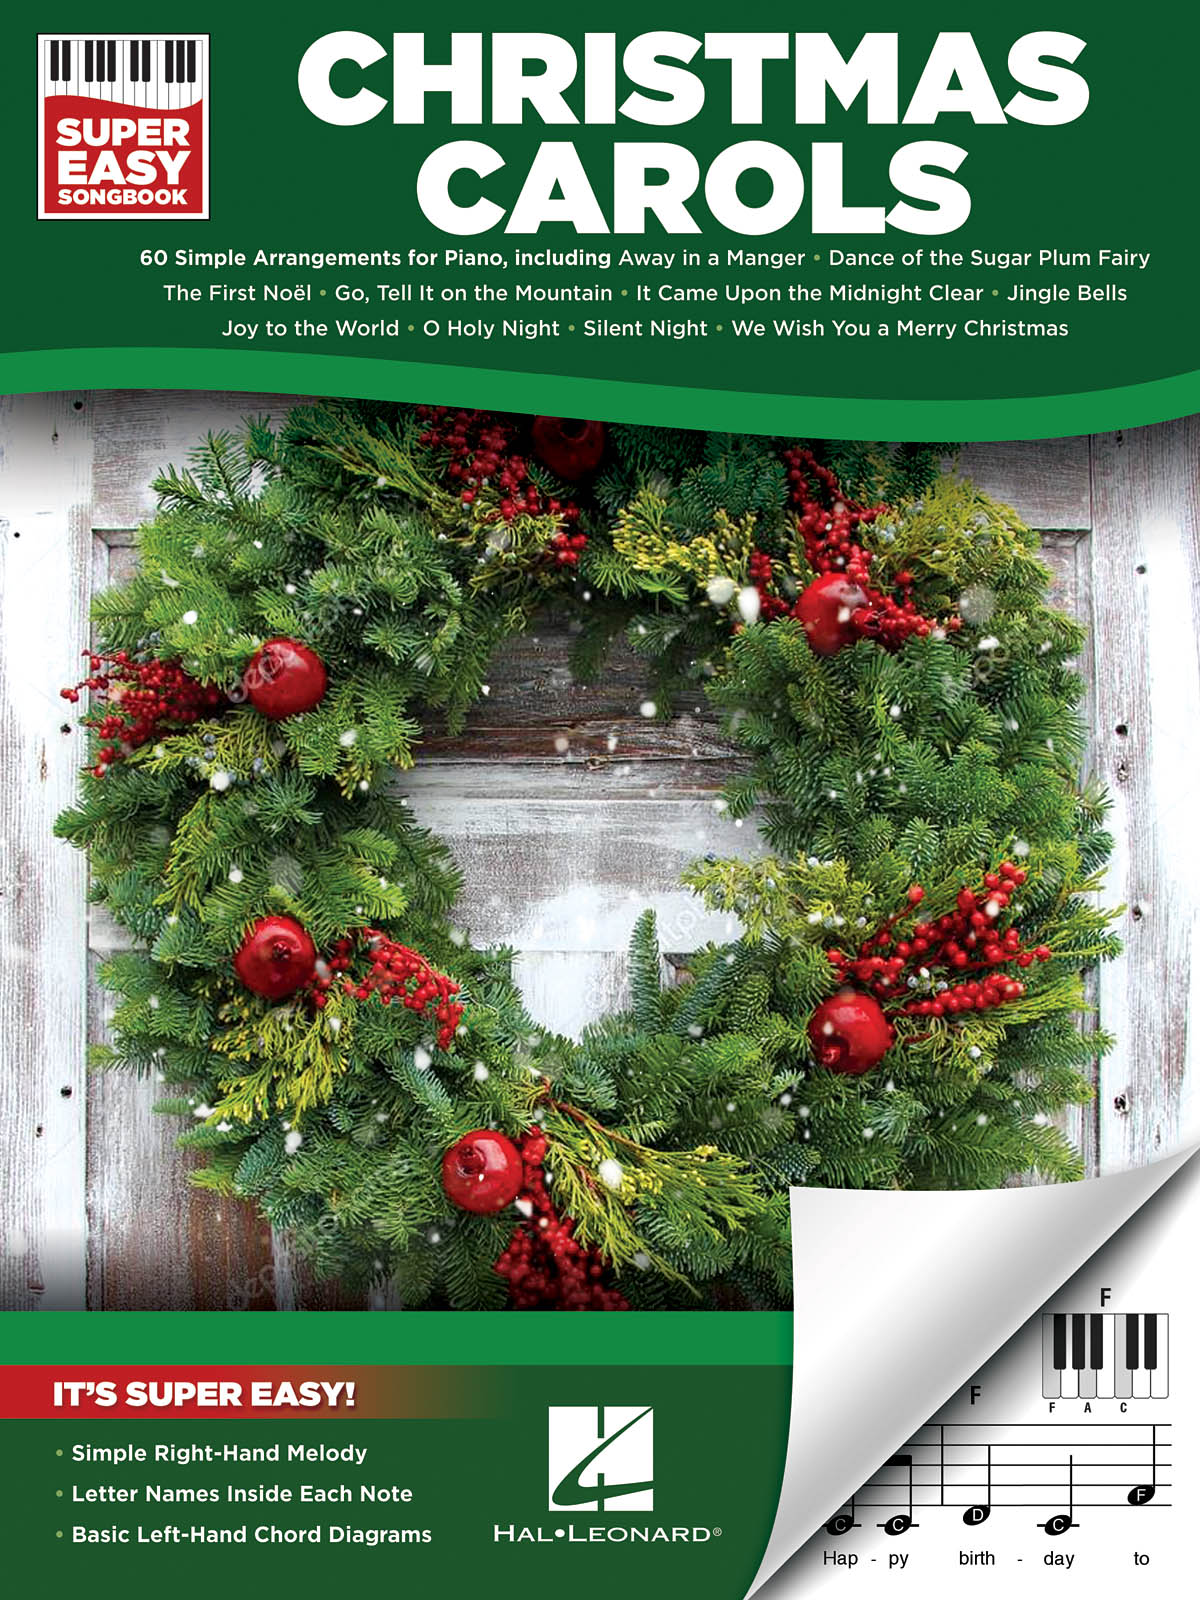 Christmas Carols - Super Easy Songbook: Piano: Mixed Songbook